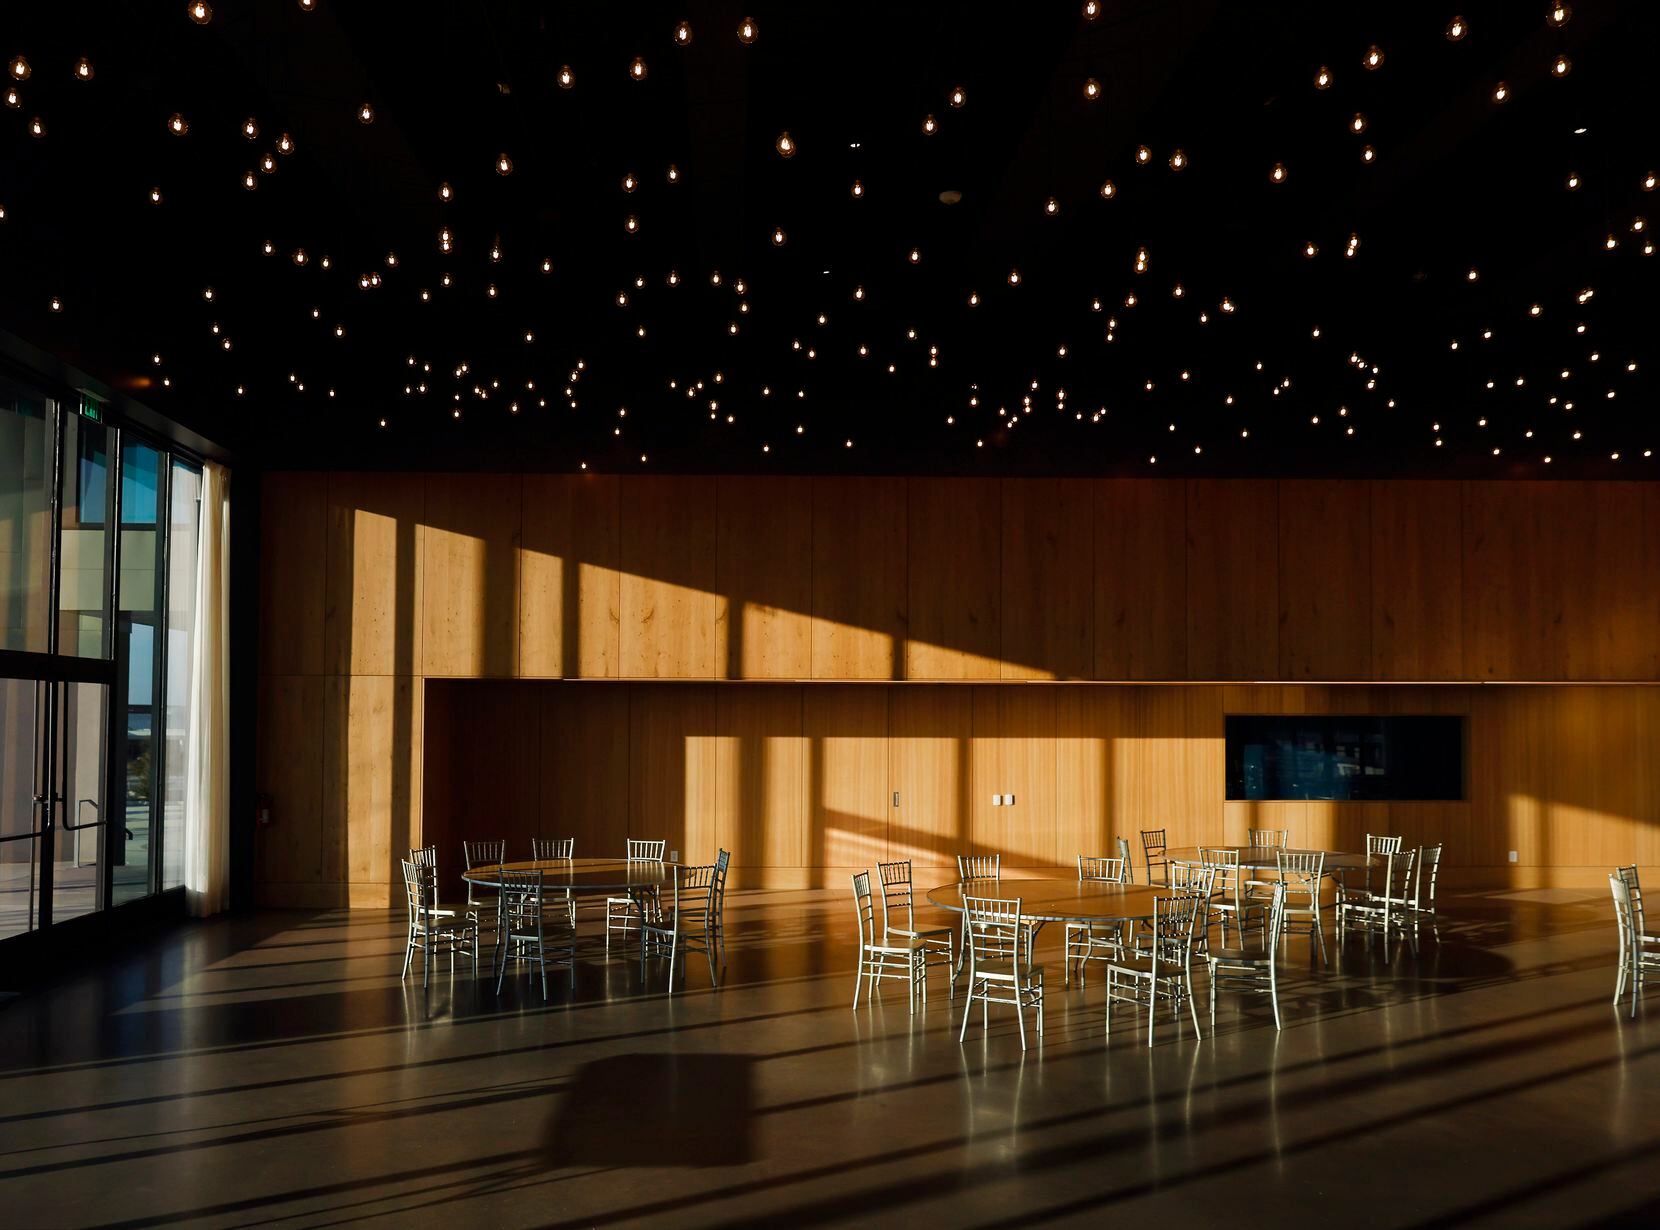 Star-cluster ceiling lights run the length of an event space at the St. Sarkis community...